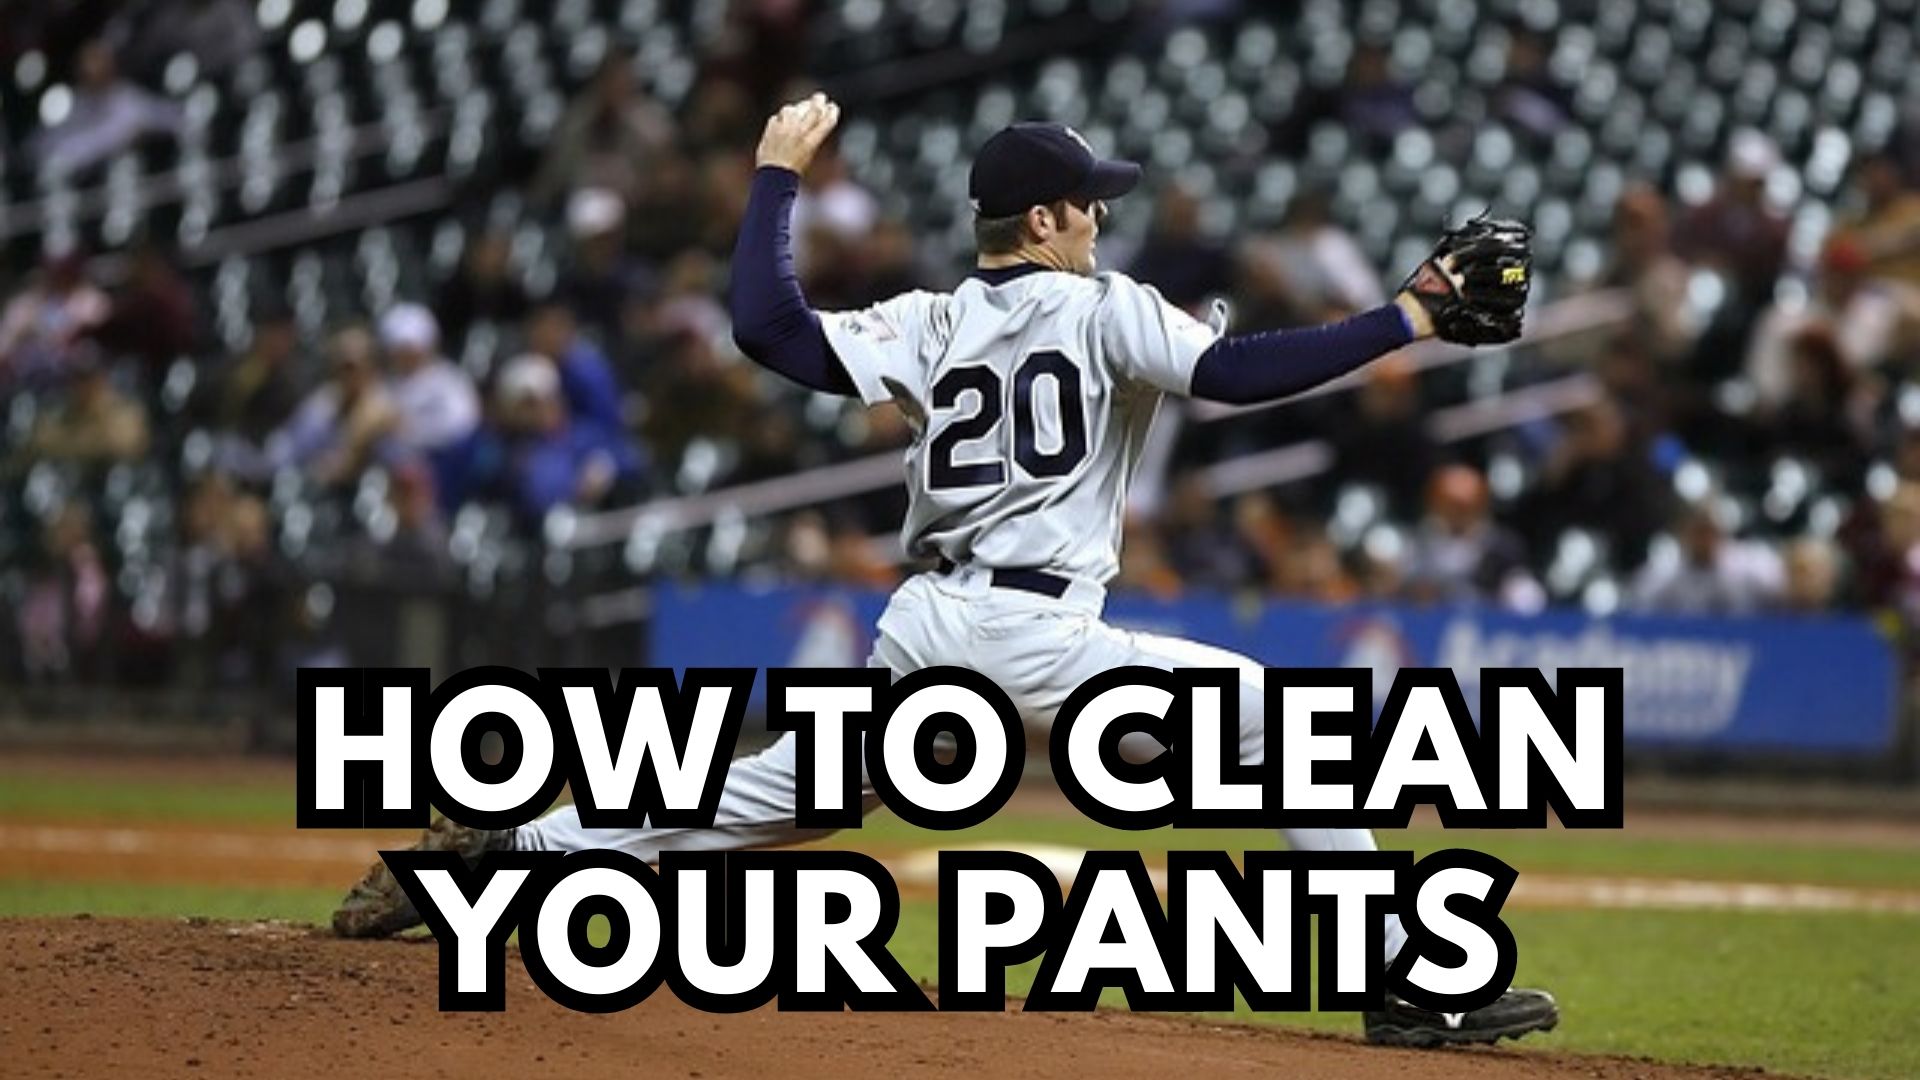 How to Clean White Baseball Pants with Piping